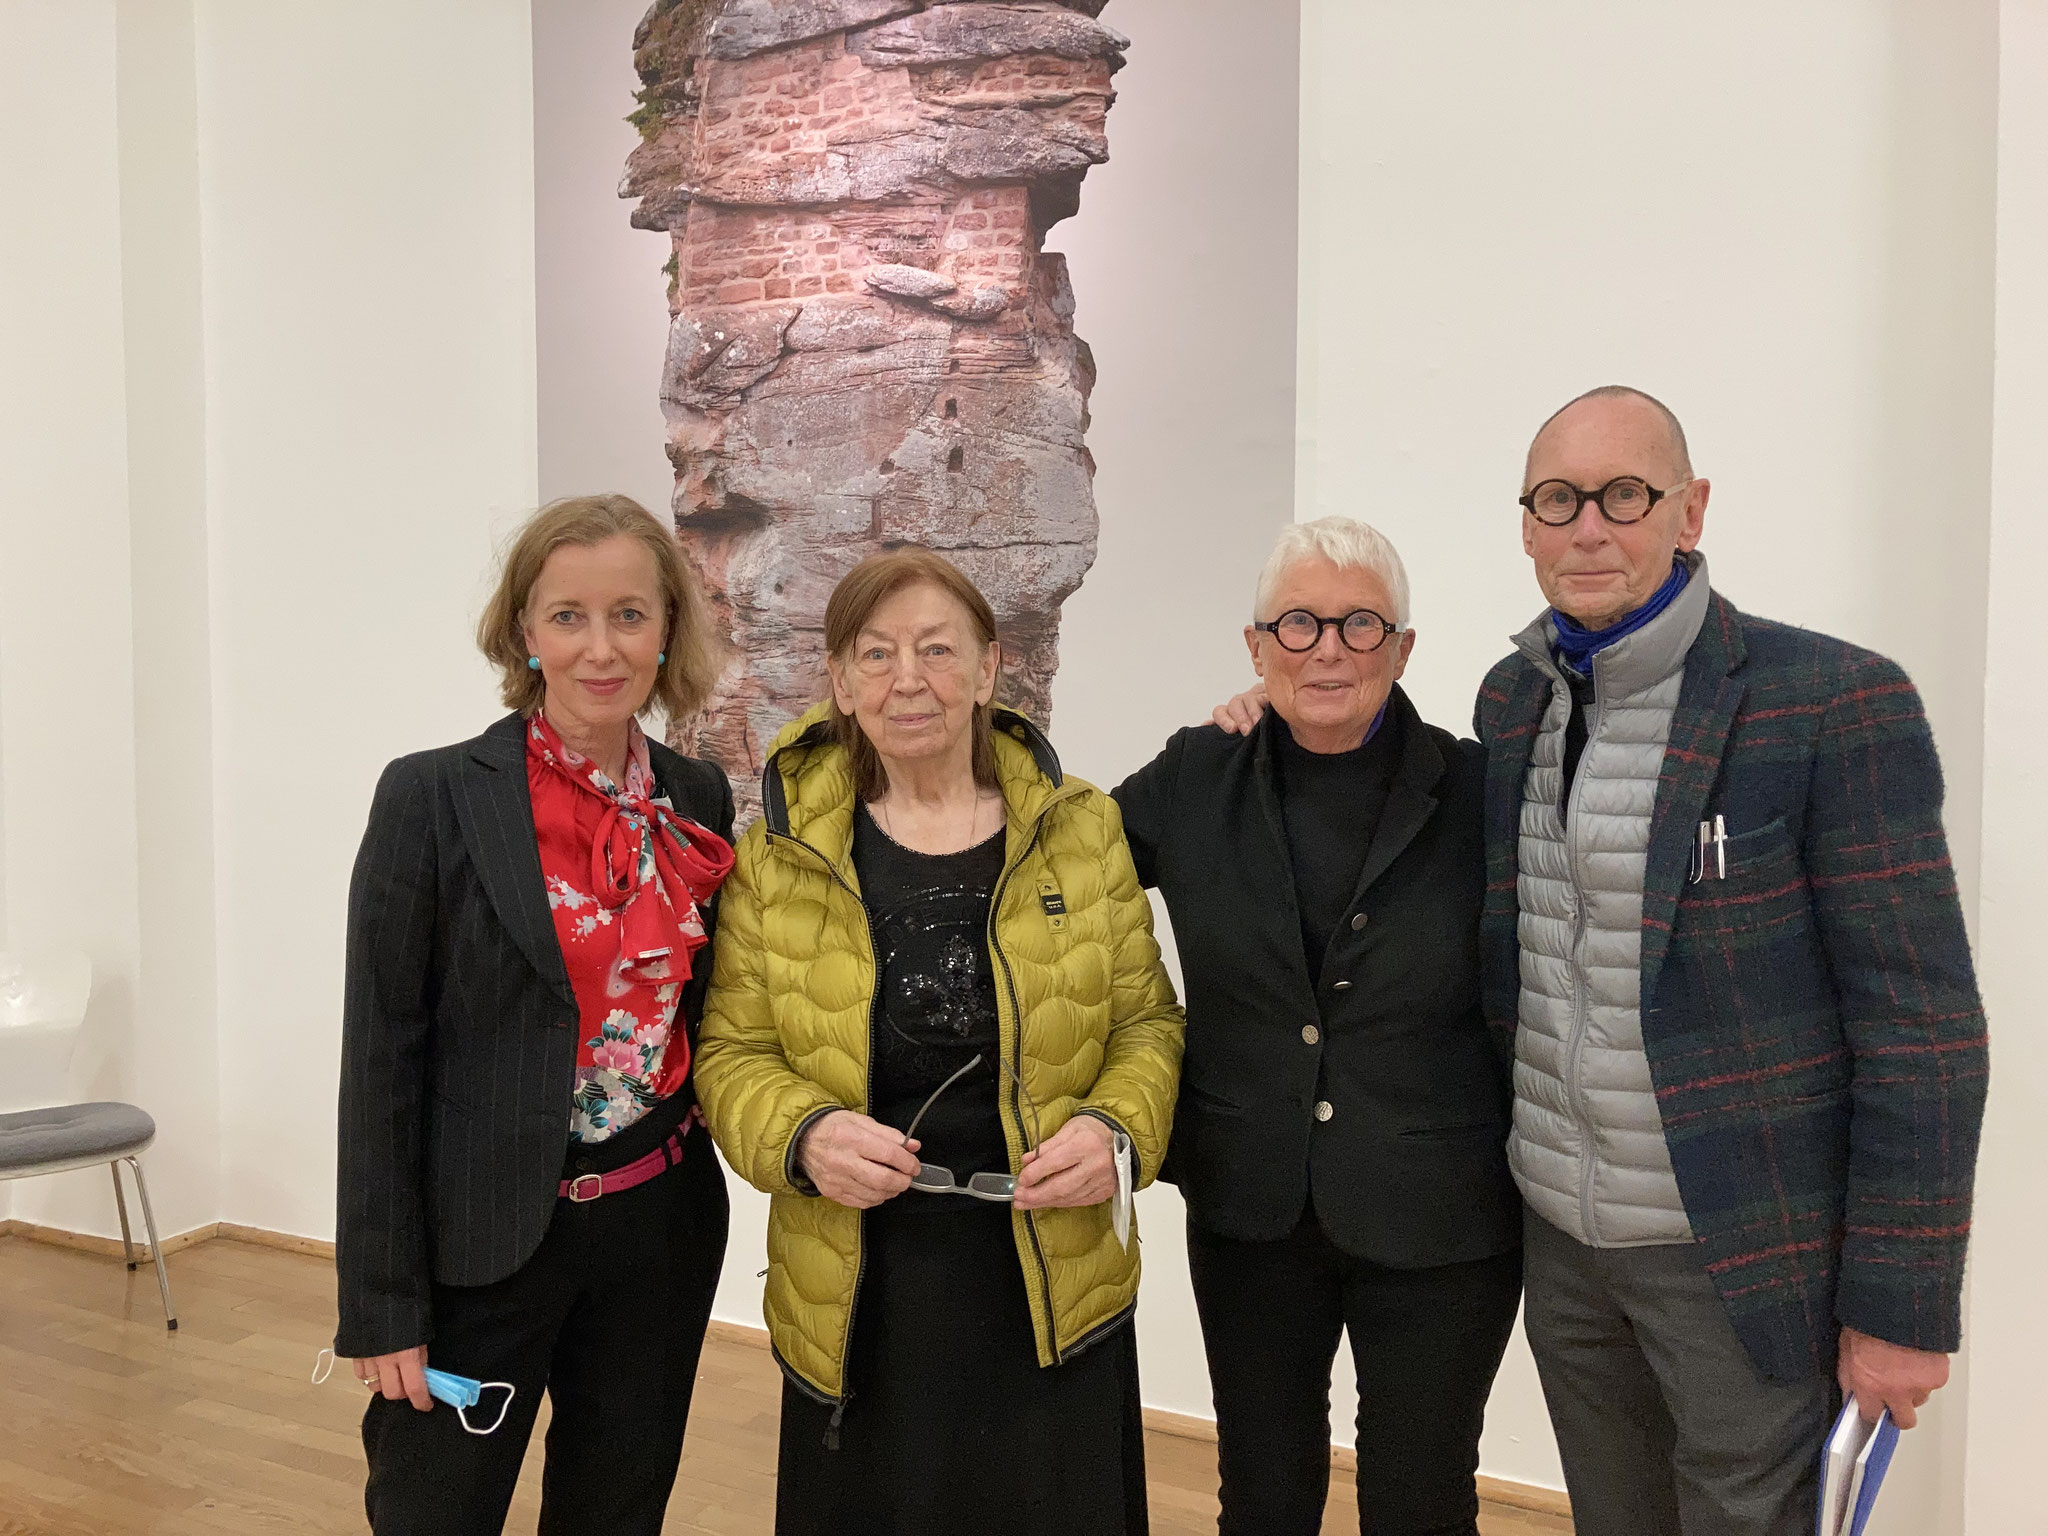 Preparations of the exhibition FRAGILITY — 30th ANNIVERSARY OF THE LUDWIG MUSEUM with the director Beate Reifenscheid, Brigitte March, Anne & Patrick Poirier, March 2021 - April 2022  photo credit Danielle March 